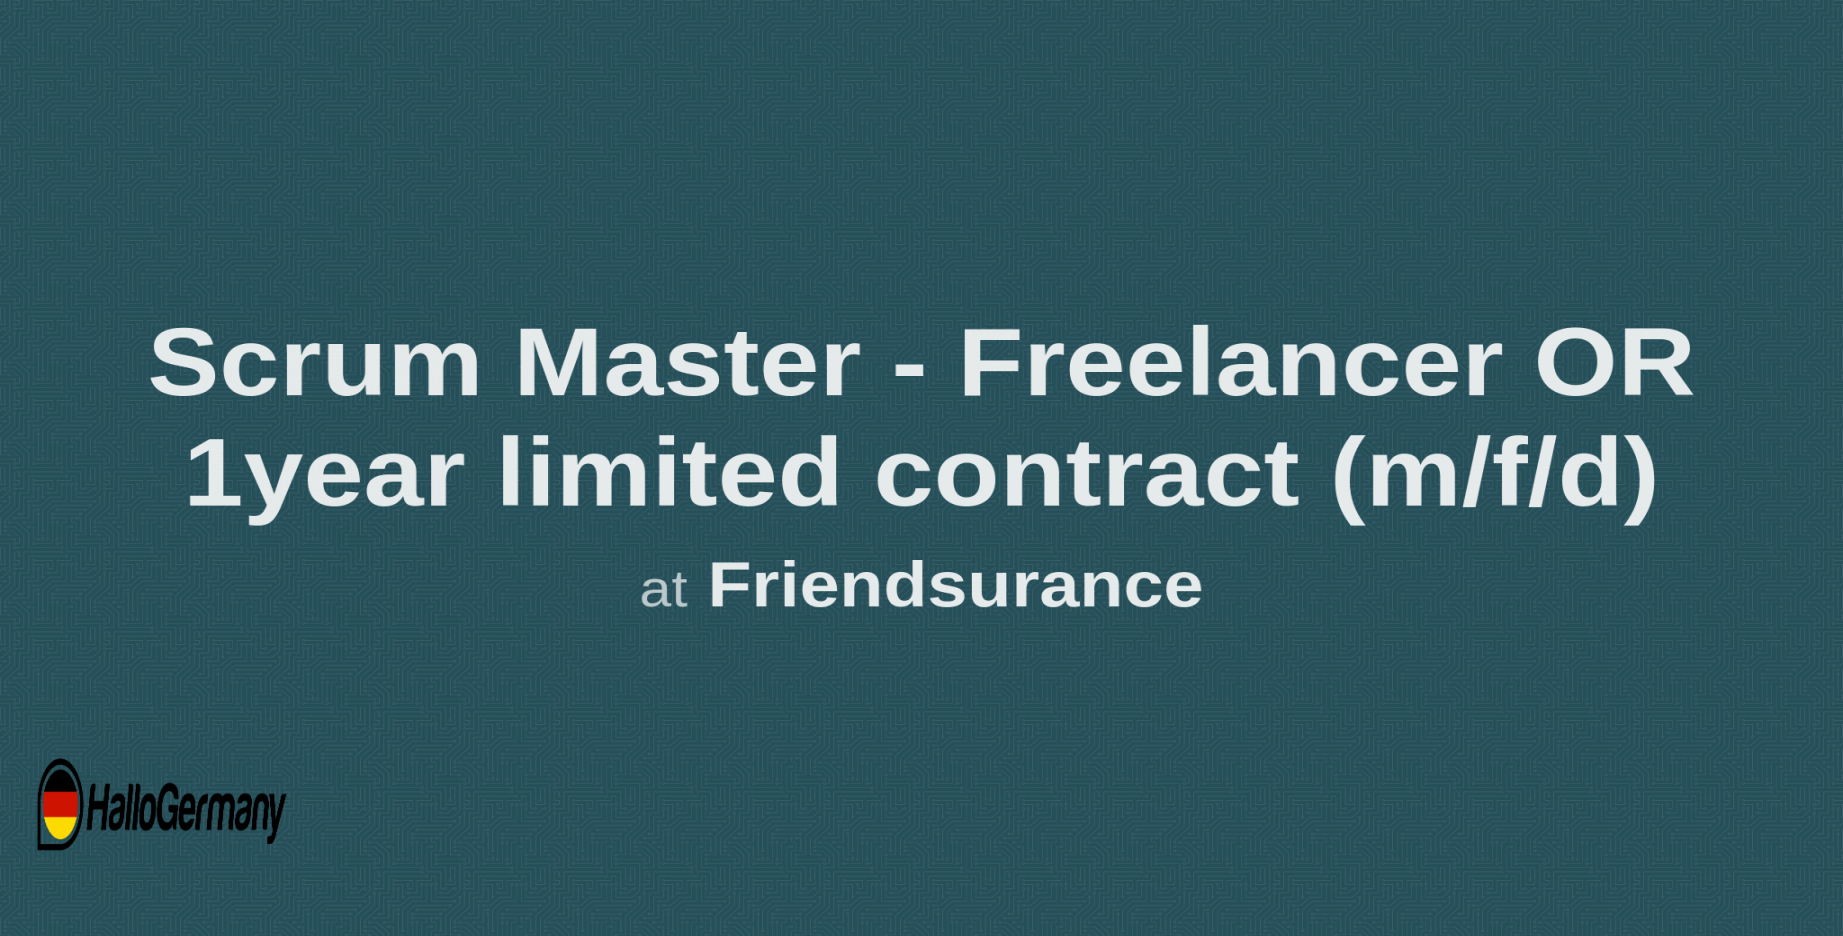 Scrum Master - Freelancer OR year limited contract (m/f/d) at Friends